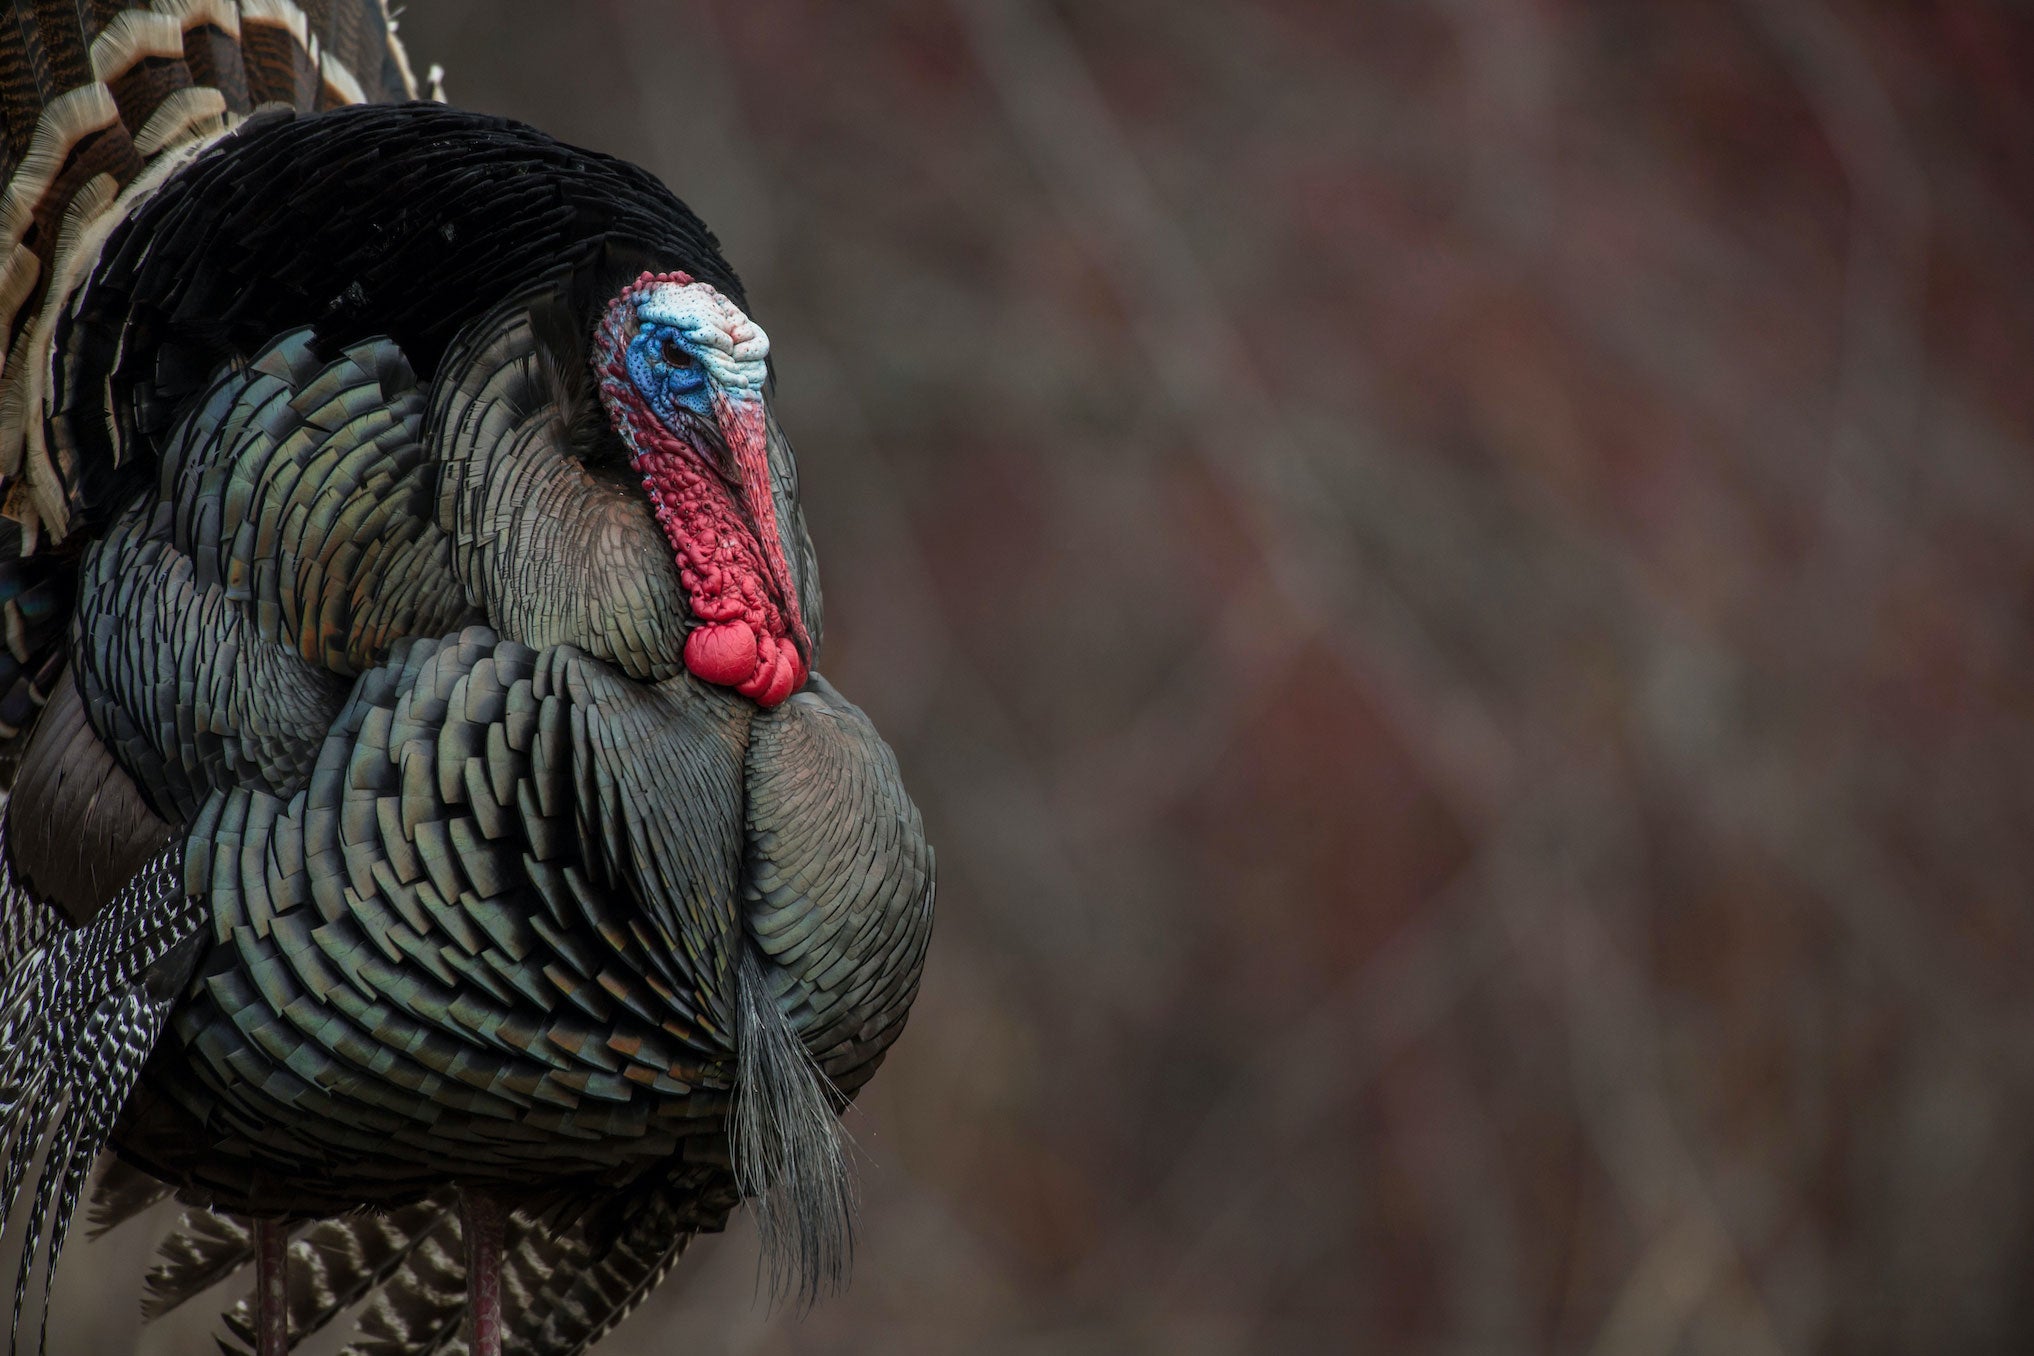 The Case for Banning Reaping and Fanning Turkeys